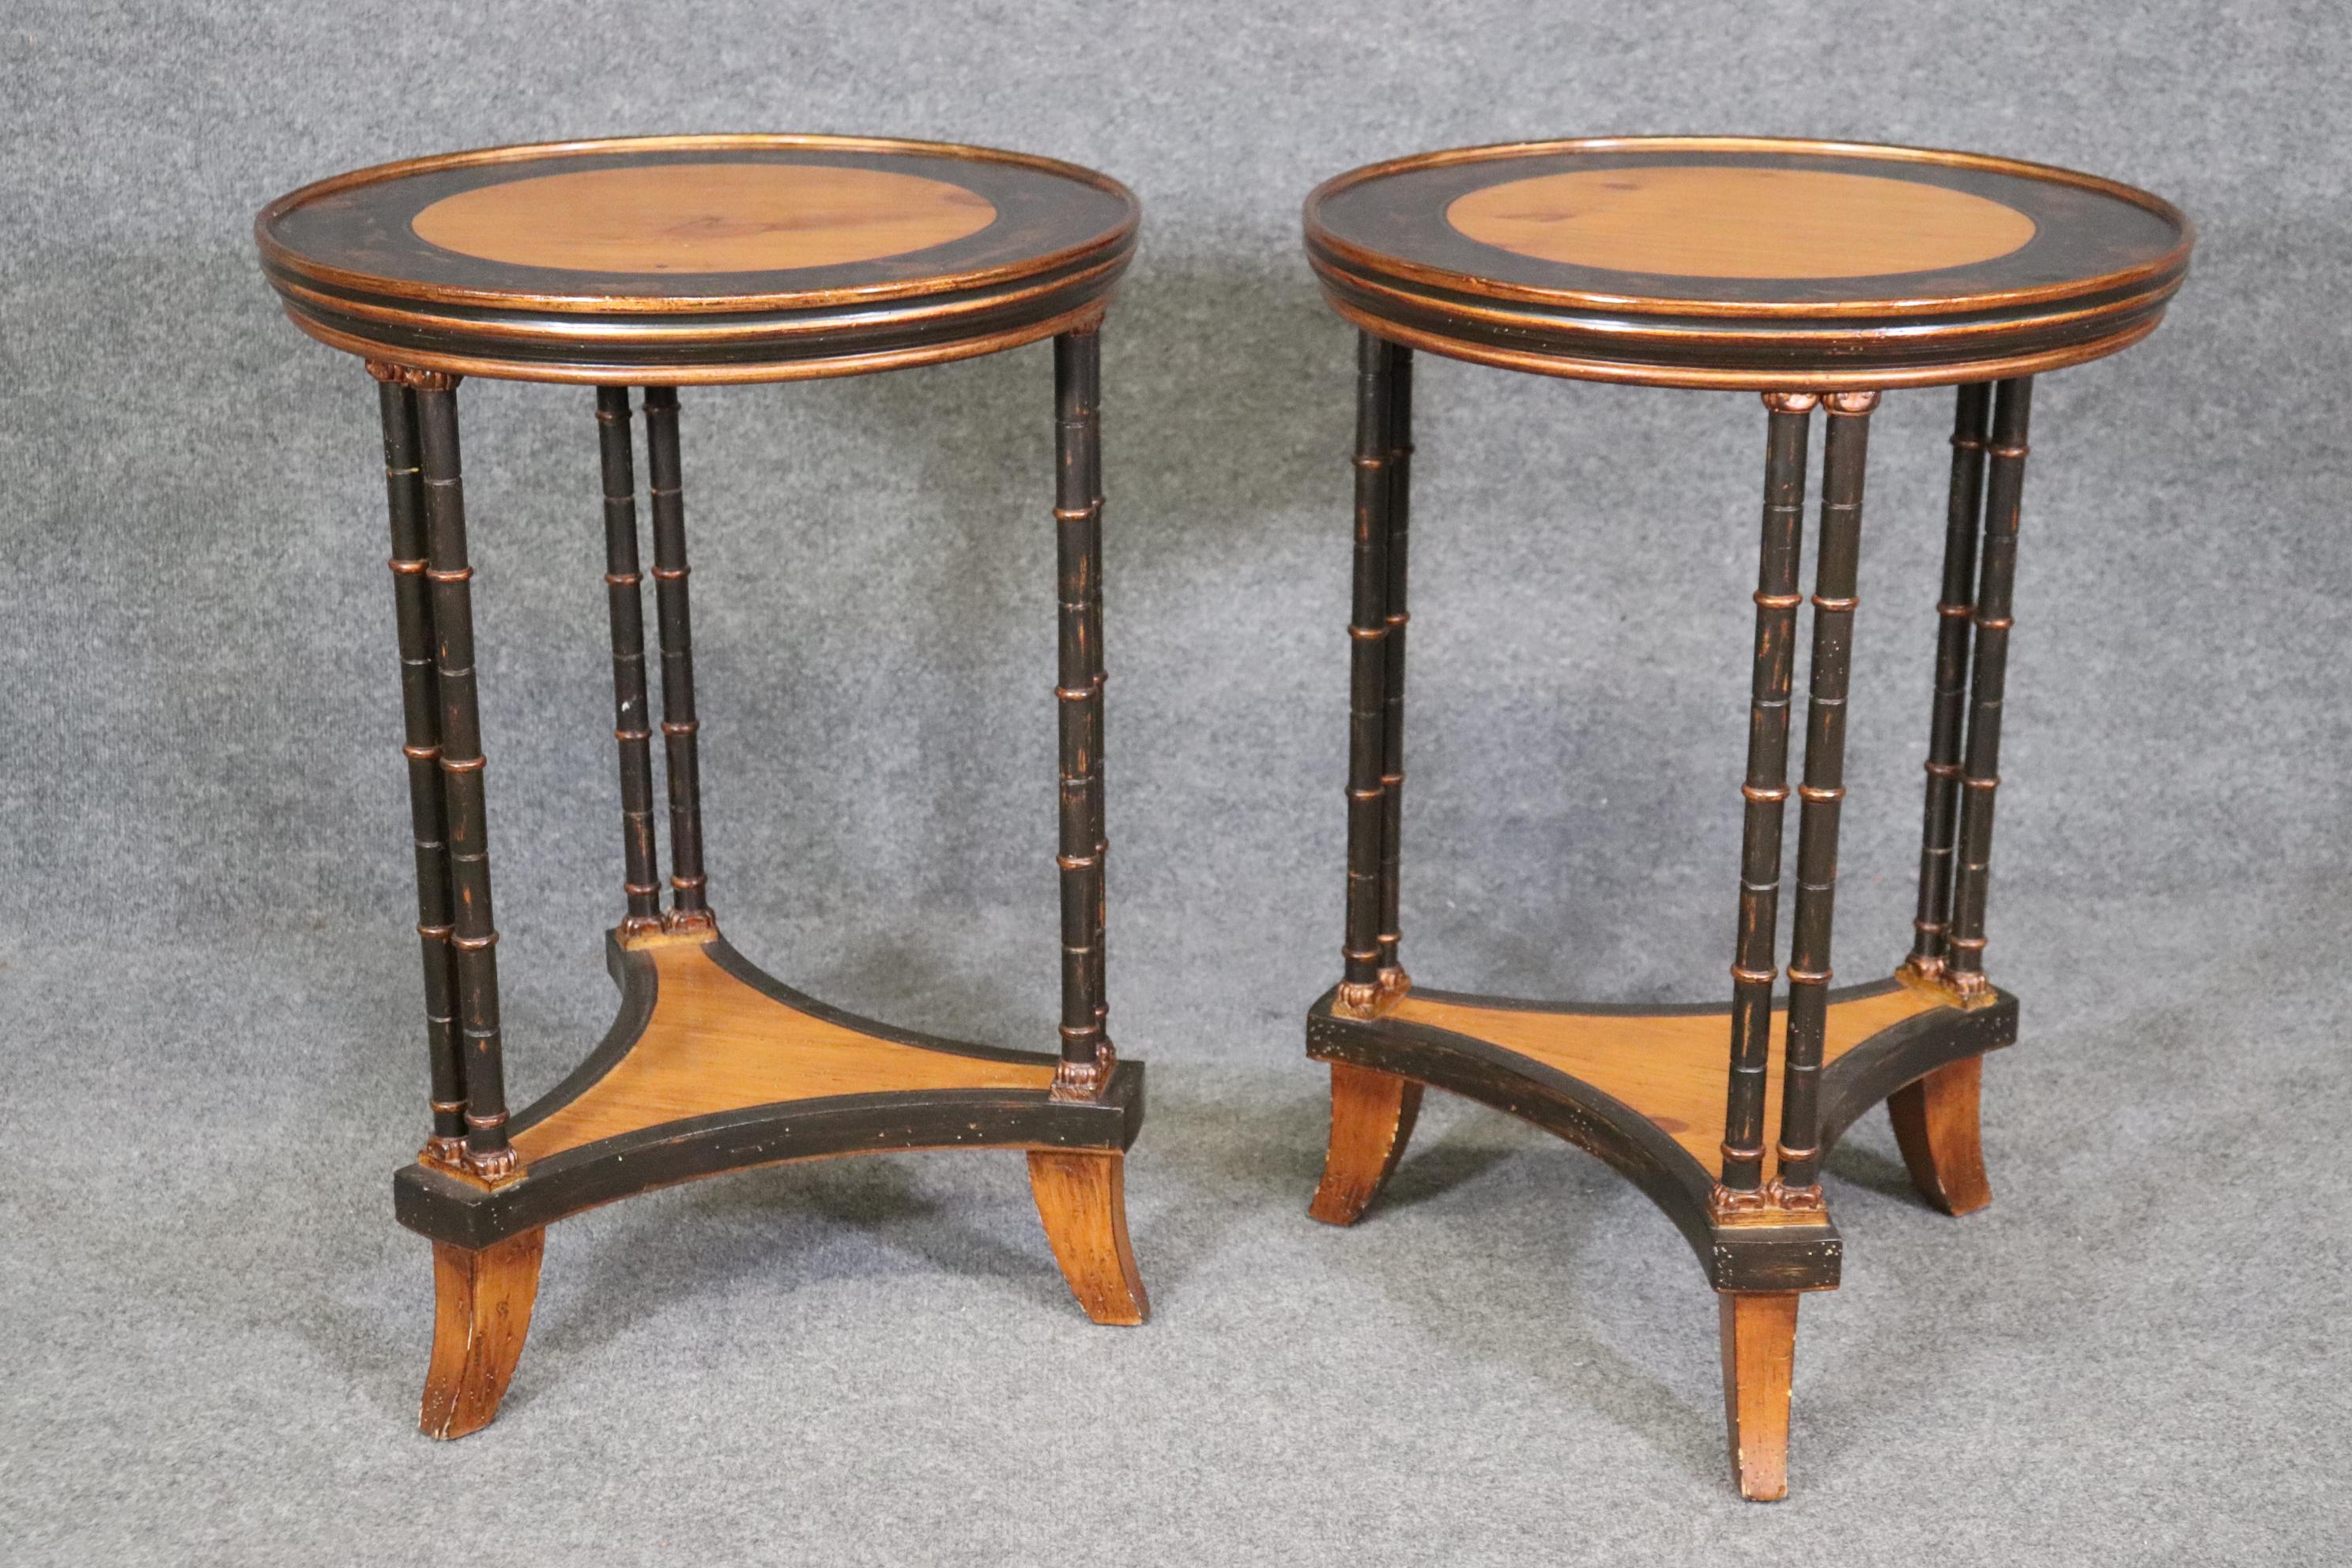 Pair of Chinoiserie Painted Faux Bamboo Yew Wood Gueridon Side Tables  For Sale 3